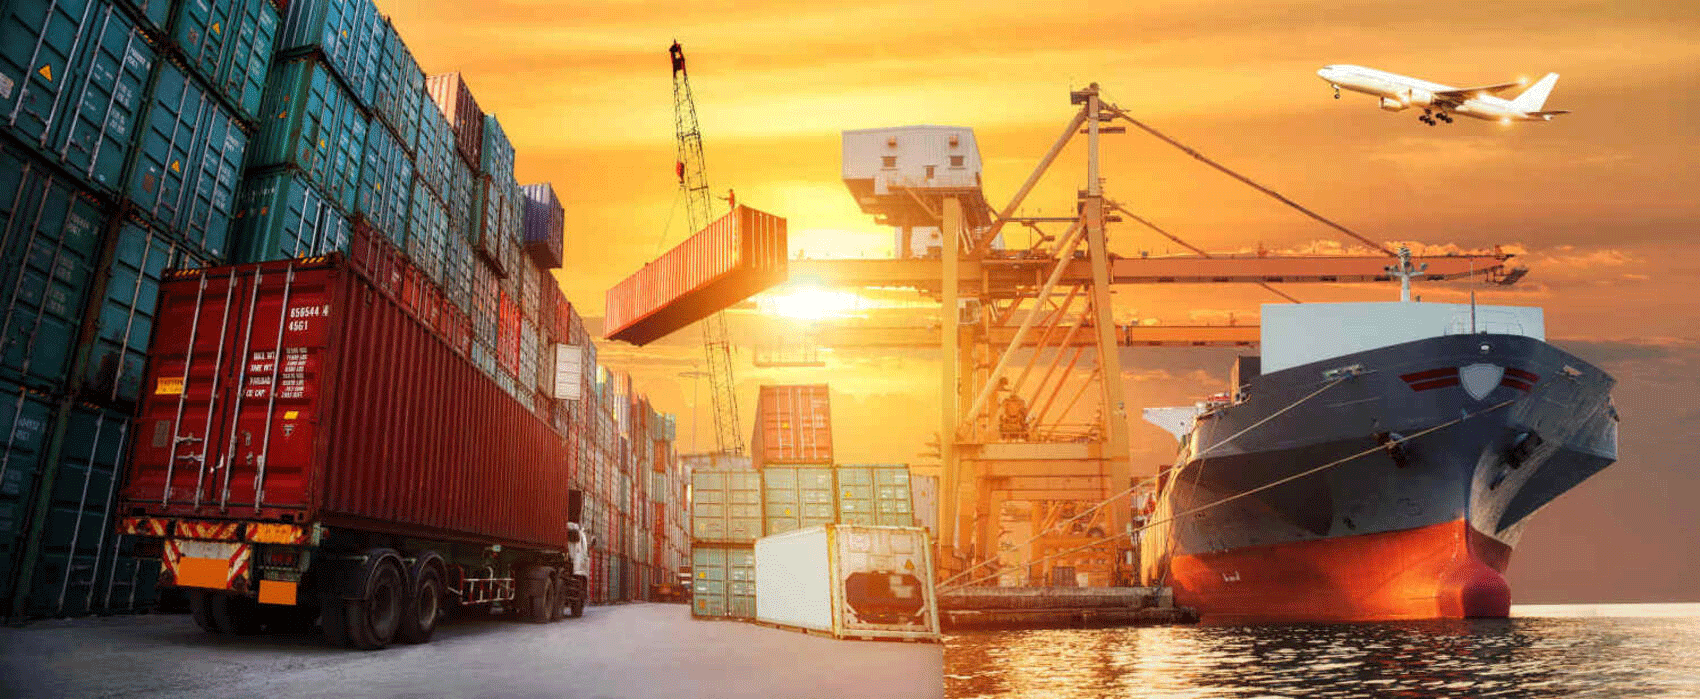 Pakistan has a trade deficit of more than 7 167.75 billion in six years